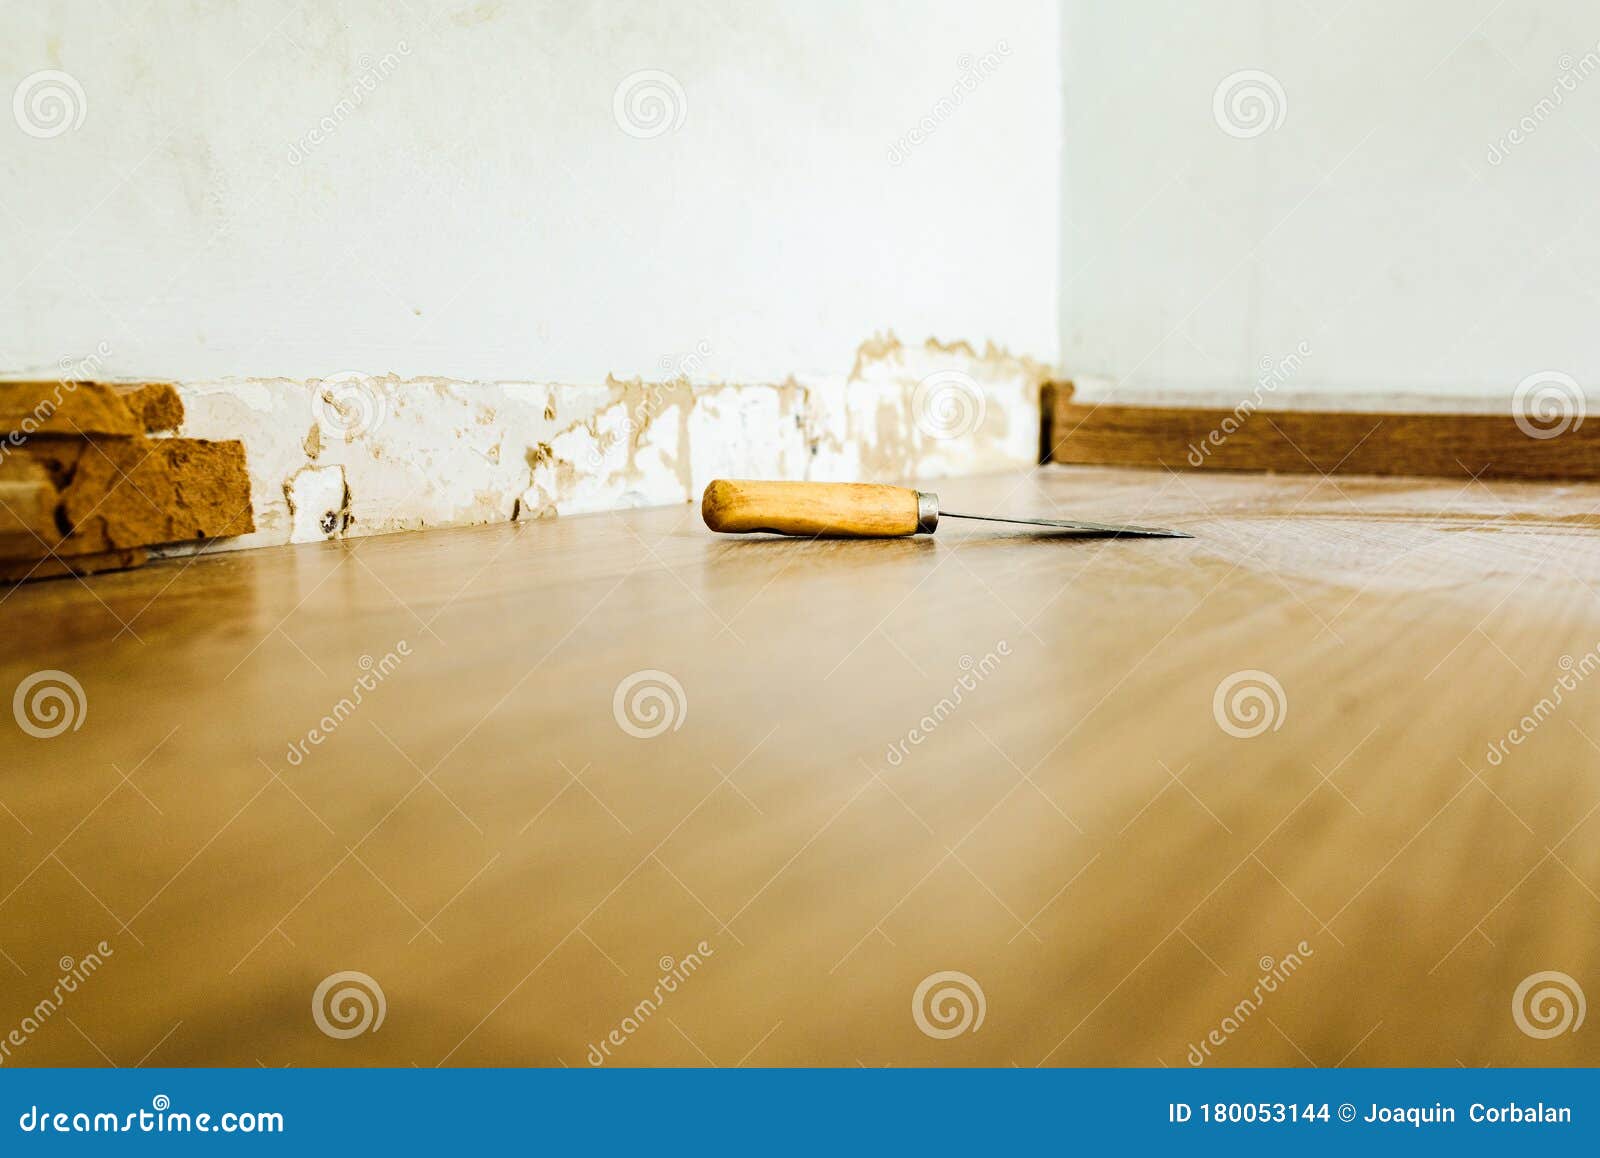 Termites Damage Wood Skirting Board Wooden Stock Photo 1481355341 |  Shutterstock